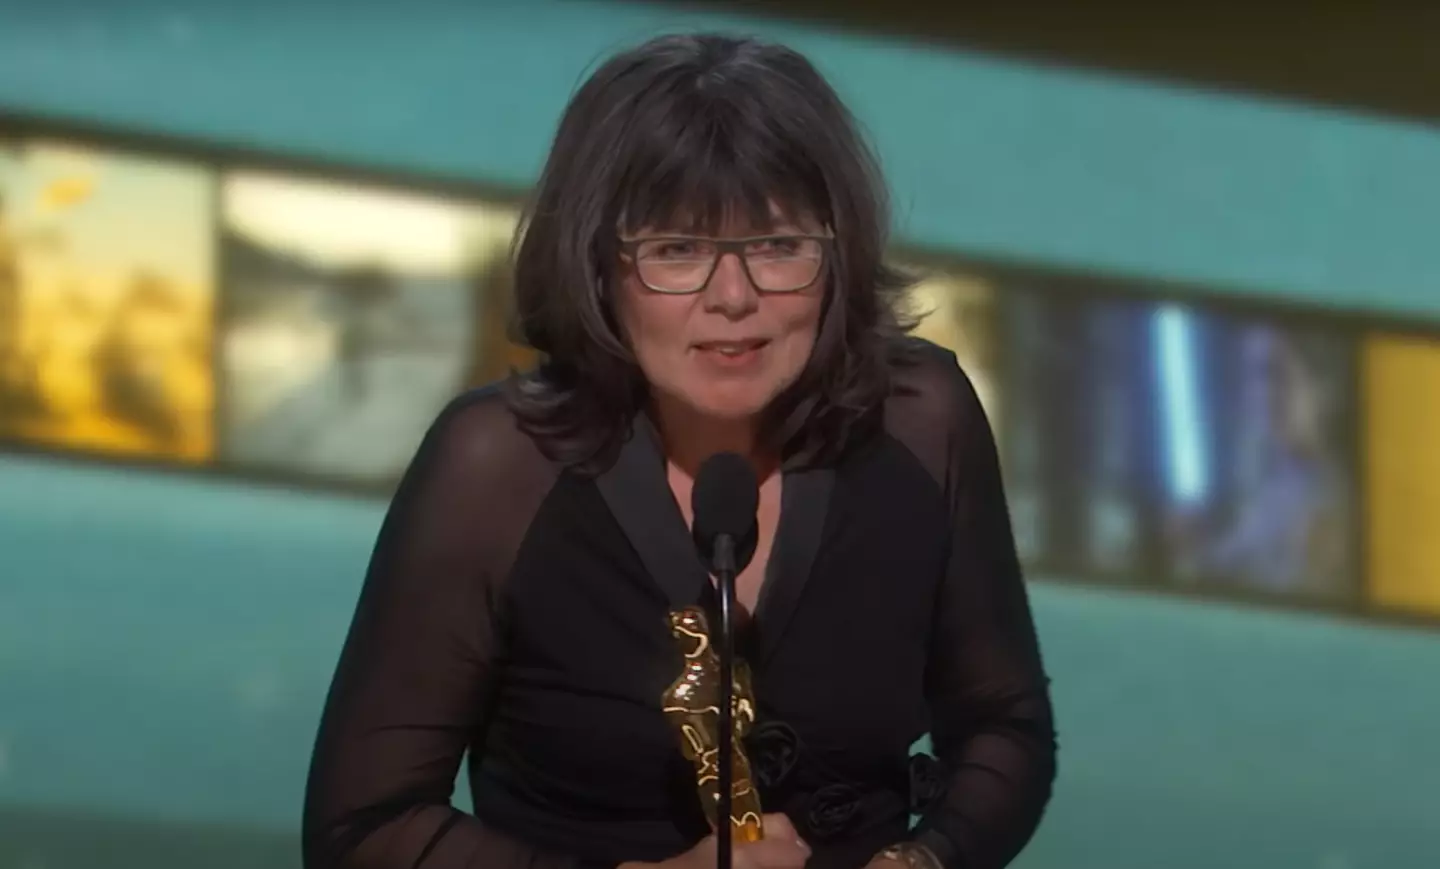 Margaret Sixel was given an Oscar for her editing work (Oscars)